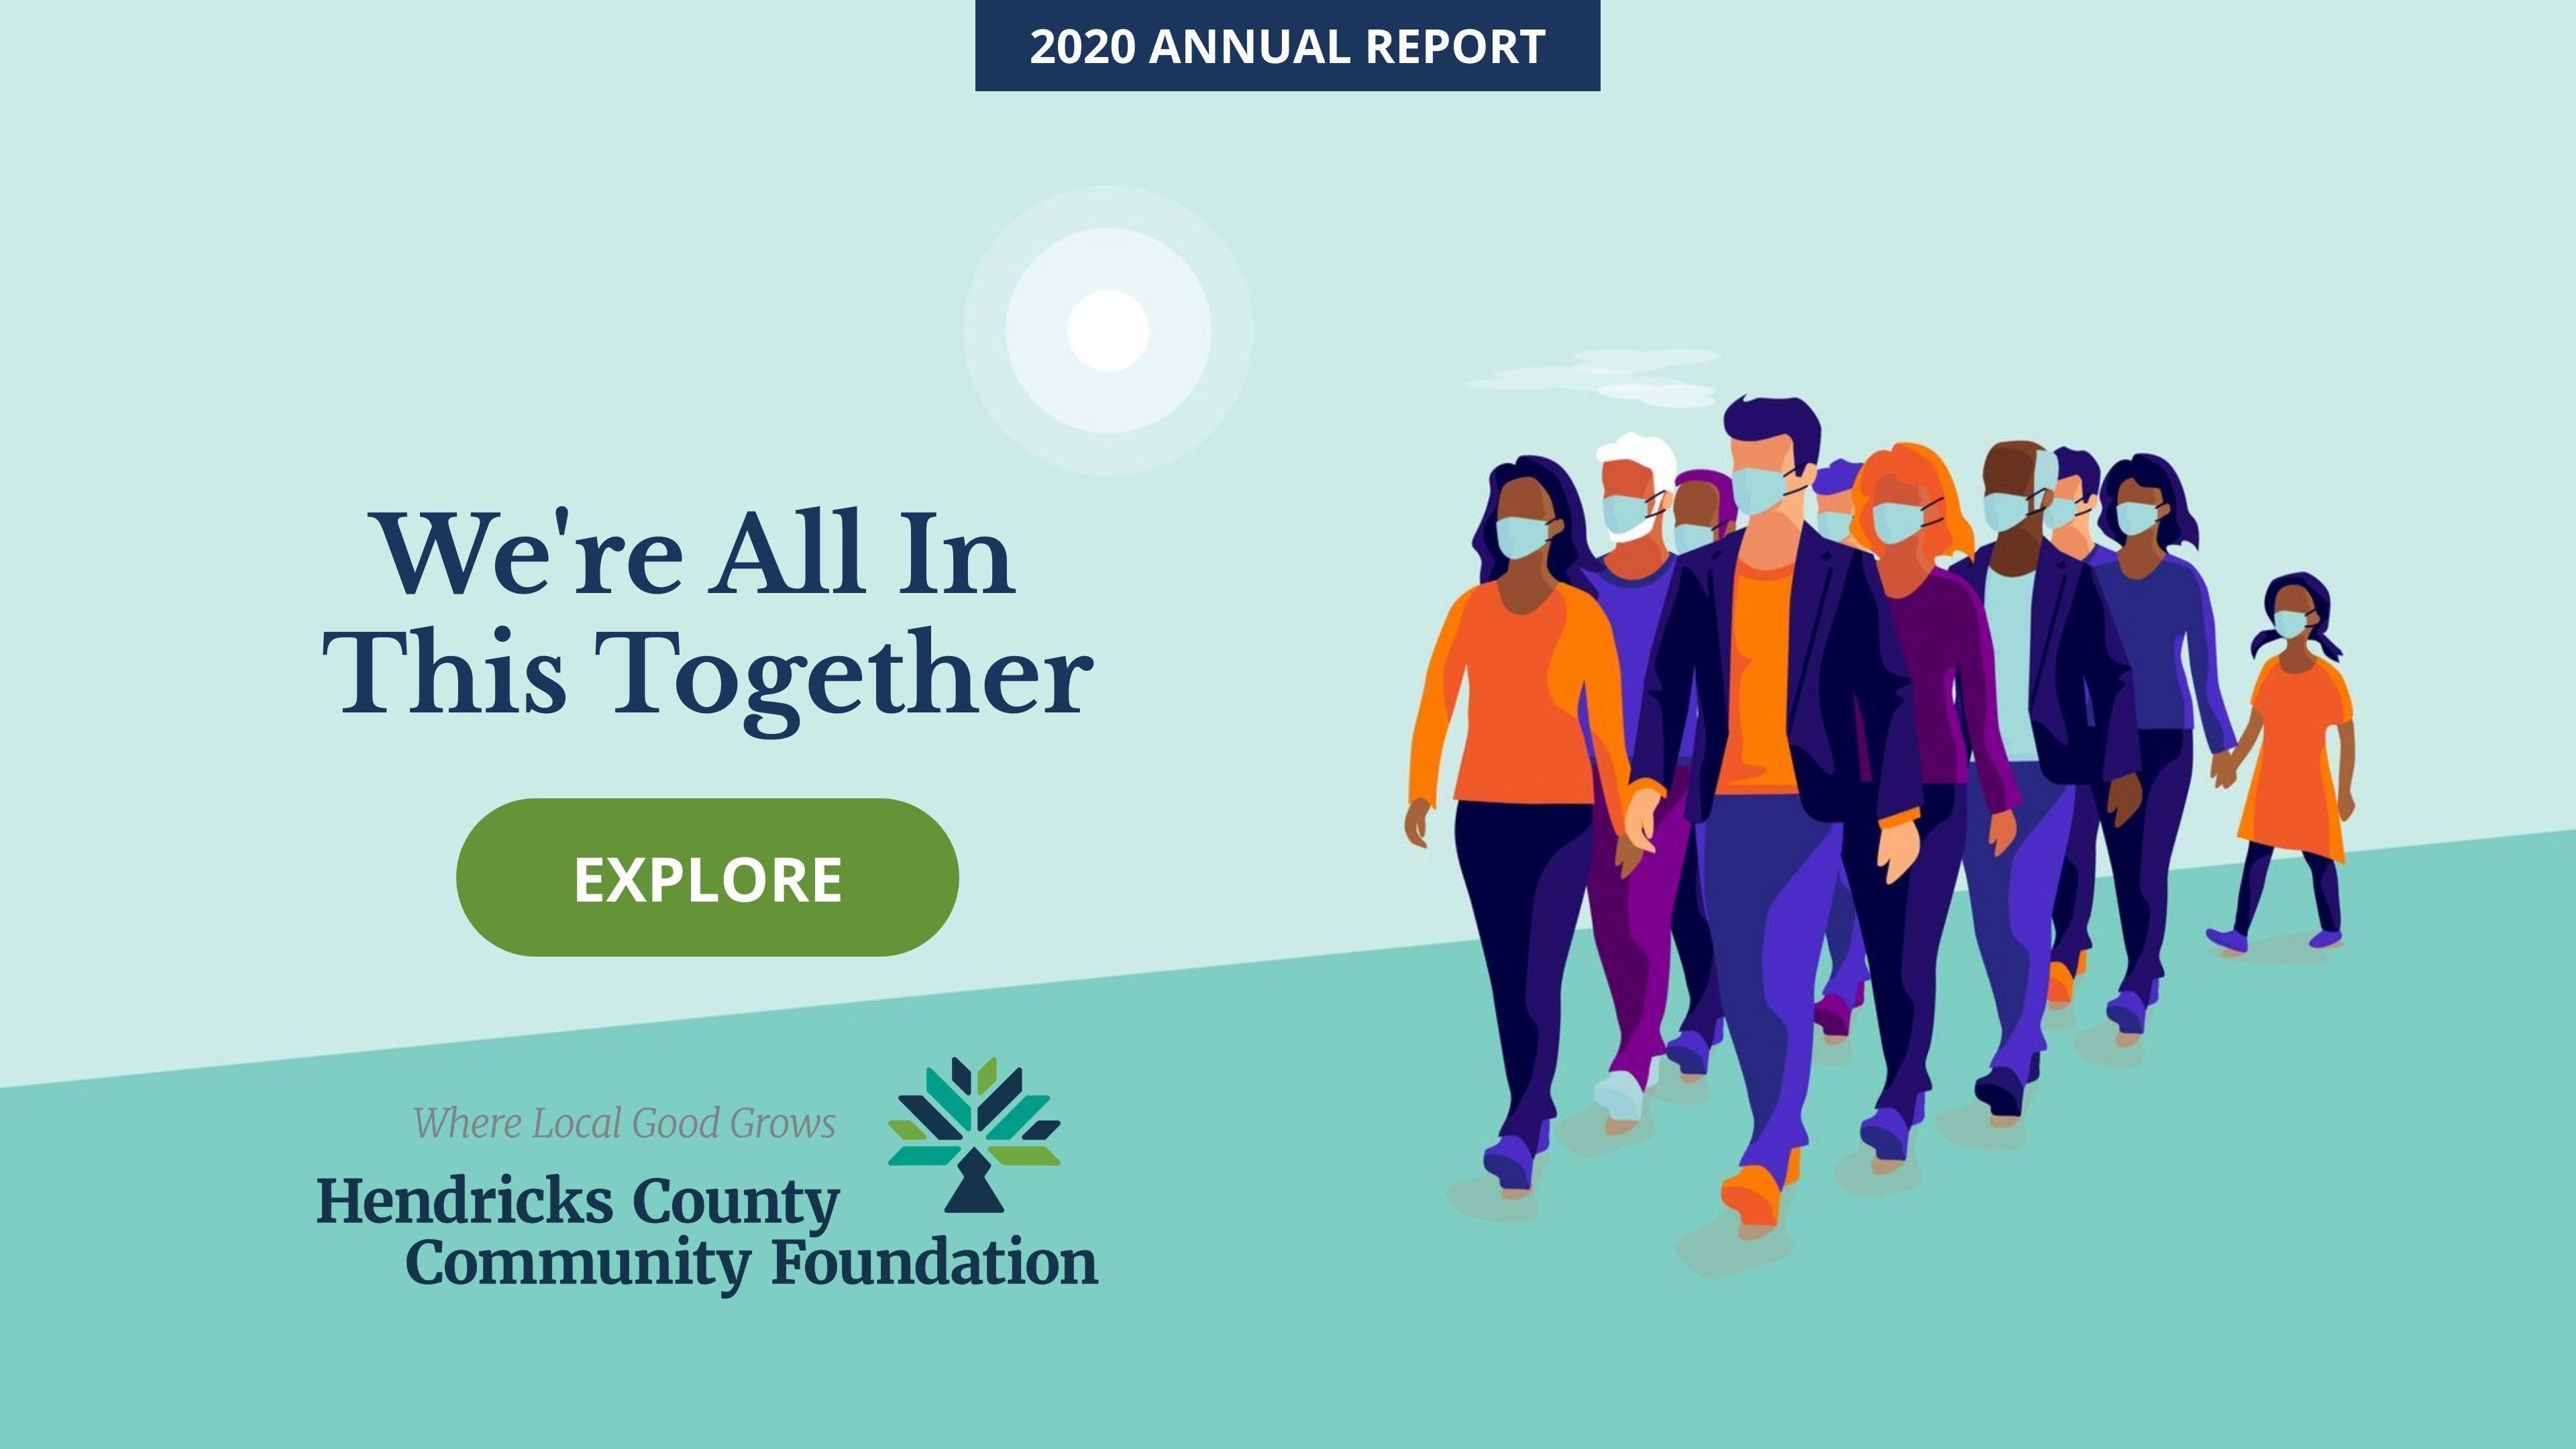 Spring 2021 Newsletter - 2020 Annual Report